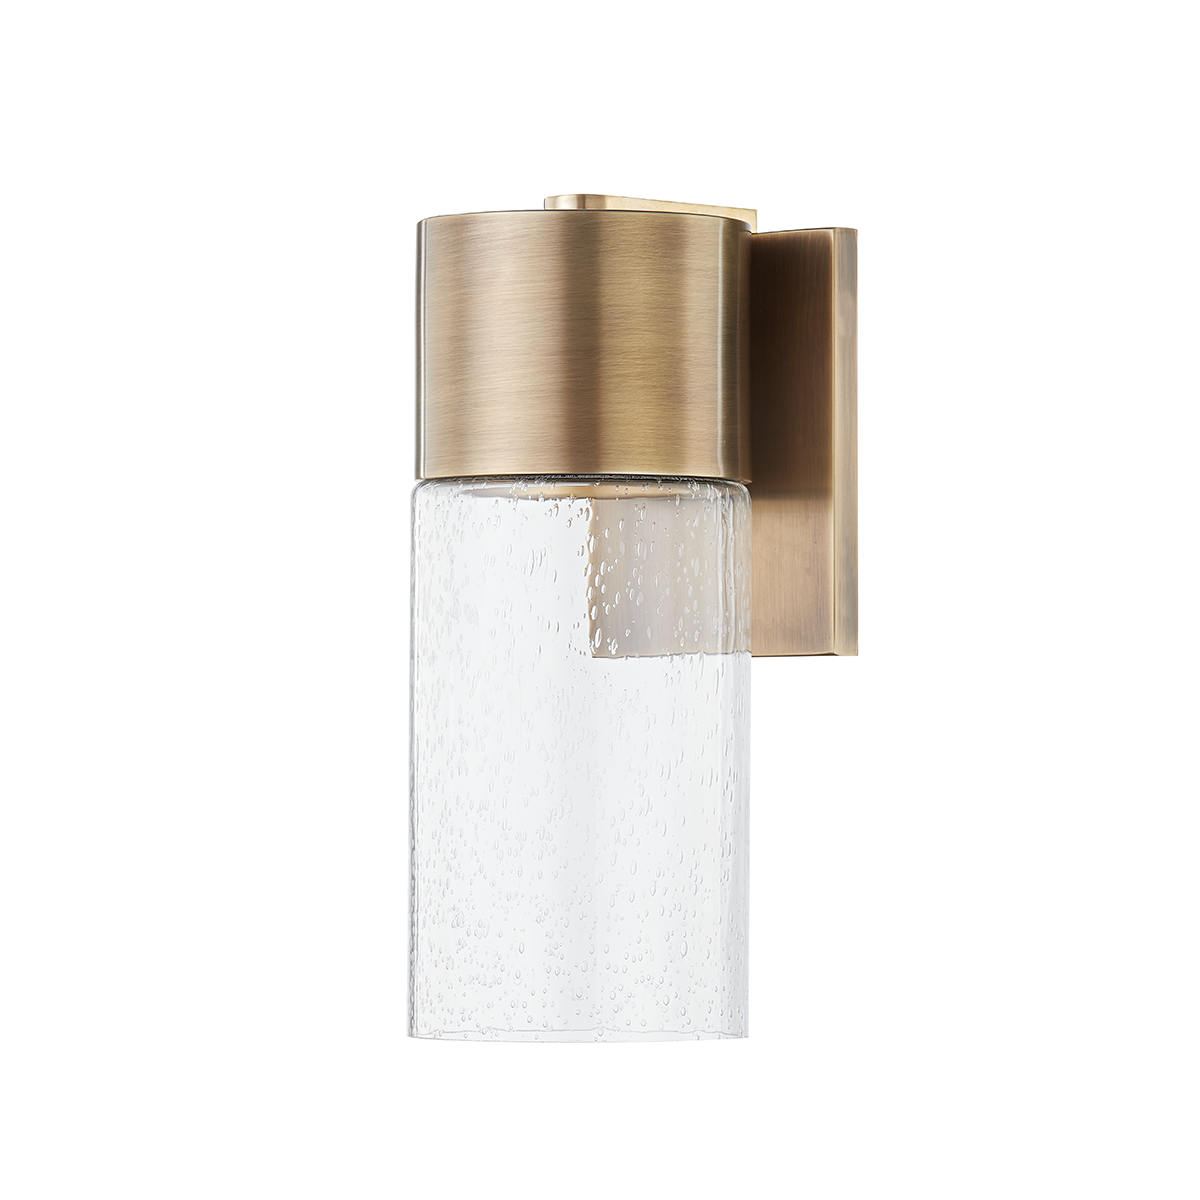 Troy PRISTINE 1 LIGHT SMALL EXTERIOR WALL SCONCE B5115 Outdoor l Wall Troy Lighting   